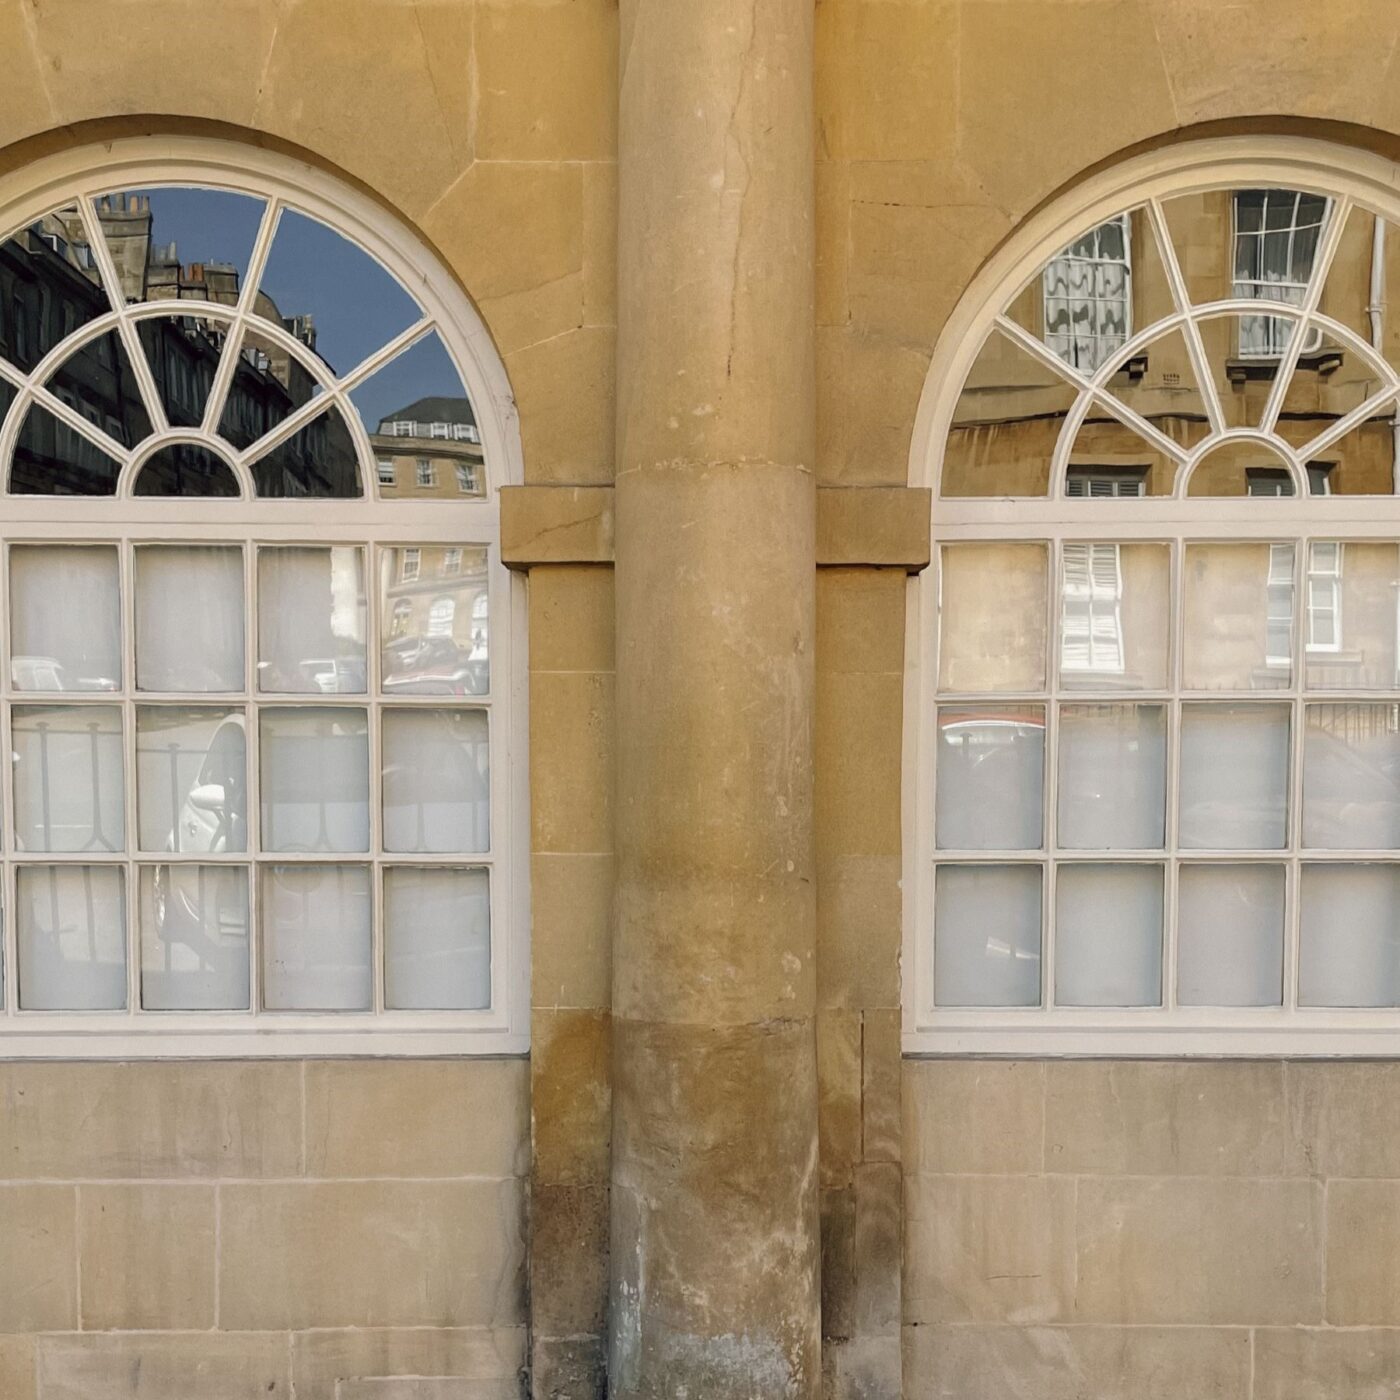 Slow travel guide to Bath